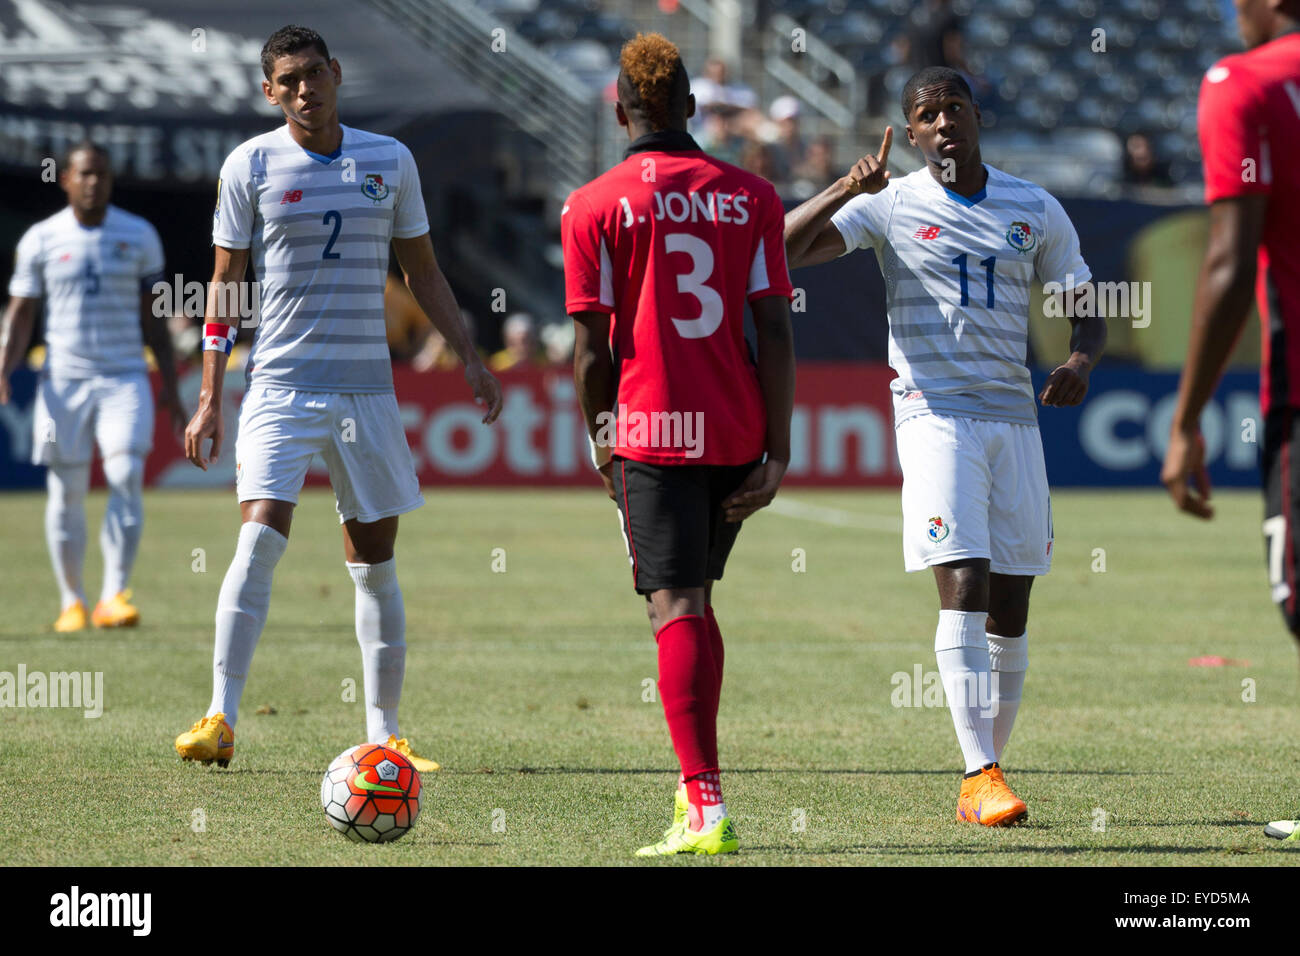 The Match By Shootout. 19th July, 2015. Panama midfielder Armando Cooper (11) reacts to Trinidad & Tobago midfielder Joevin Jones (3) during the CONCACAF Gold Cup 2015 Quarterfinal match between the Trinidad & Tobago and Panama at MetLife Stadium in East Rutherford, New Jersey. Panama won the match by shootout. (Christopher Szagola/Cal Sport Media) © csm/Alamy Live News Stock Photo